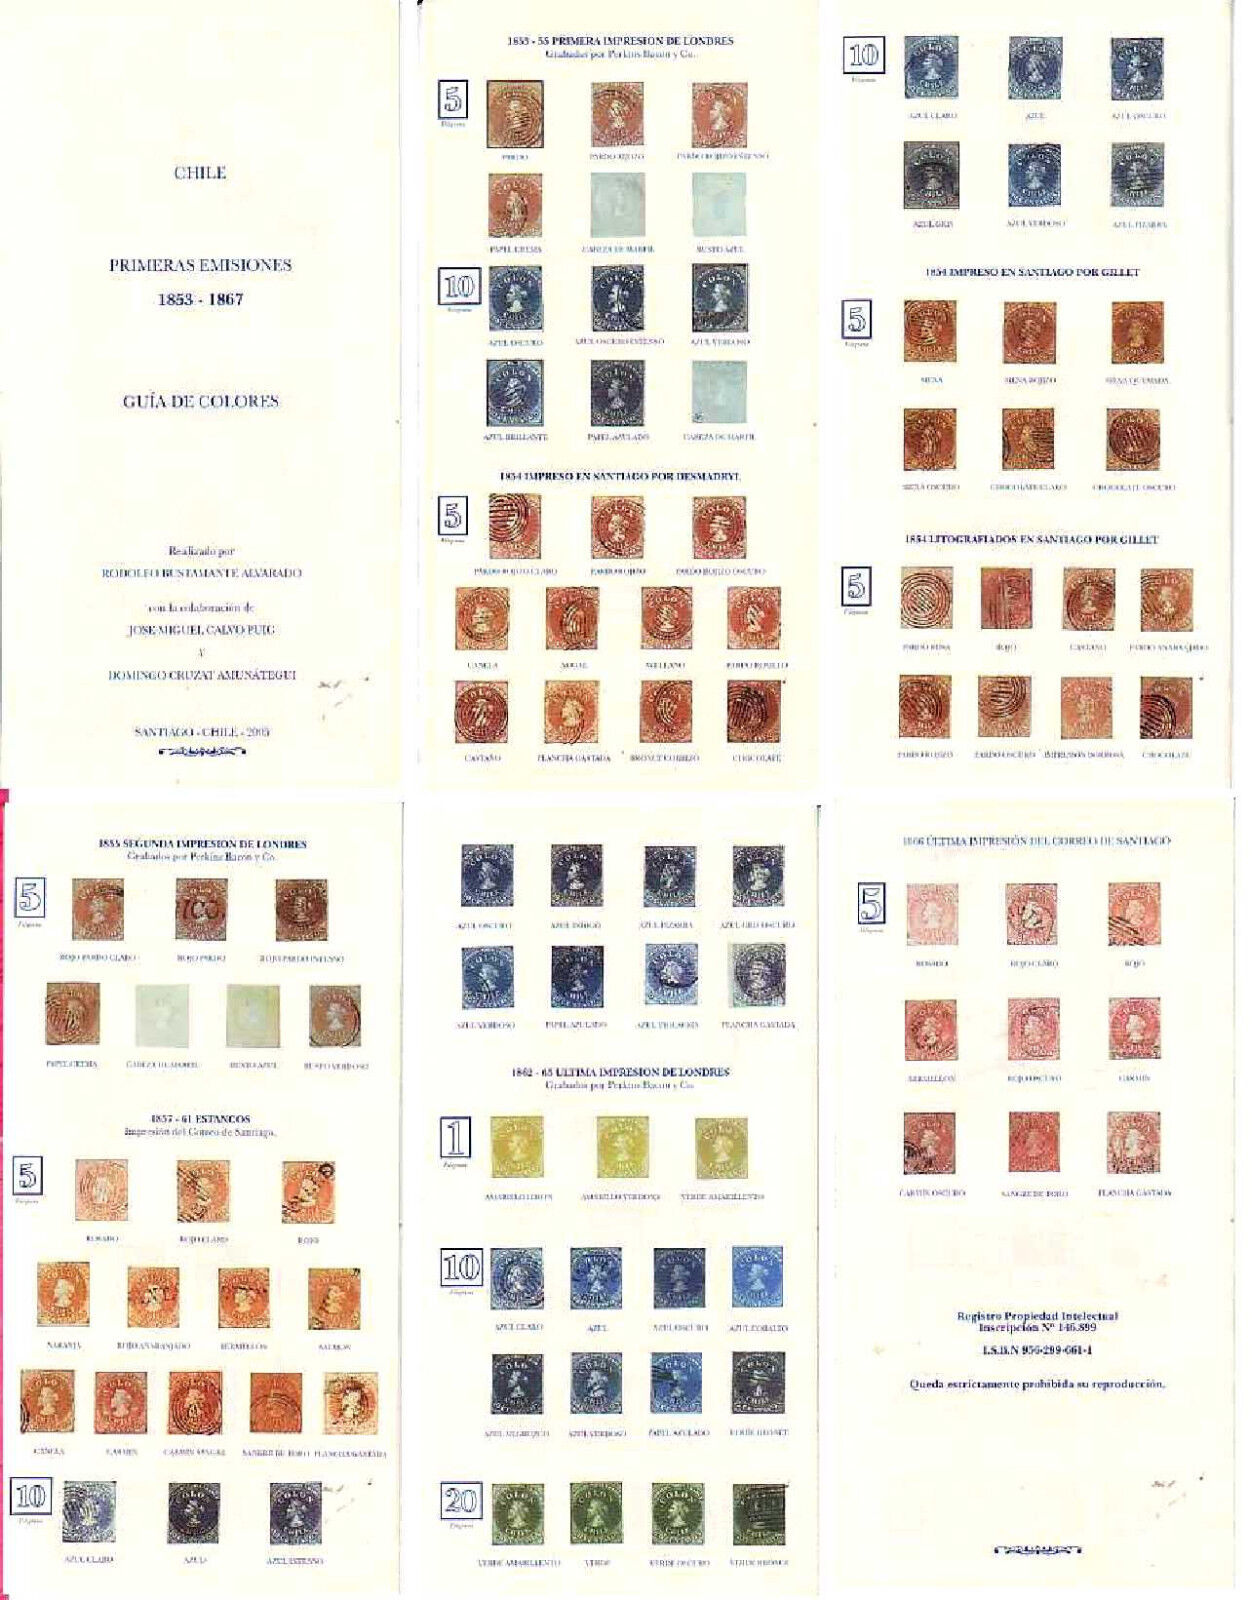 Chile (1) Color Guide , First Chilean Stamps 1853-1867